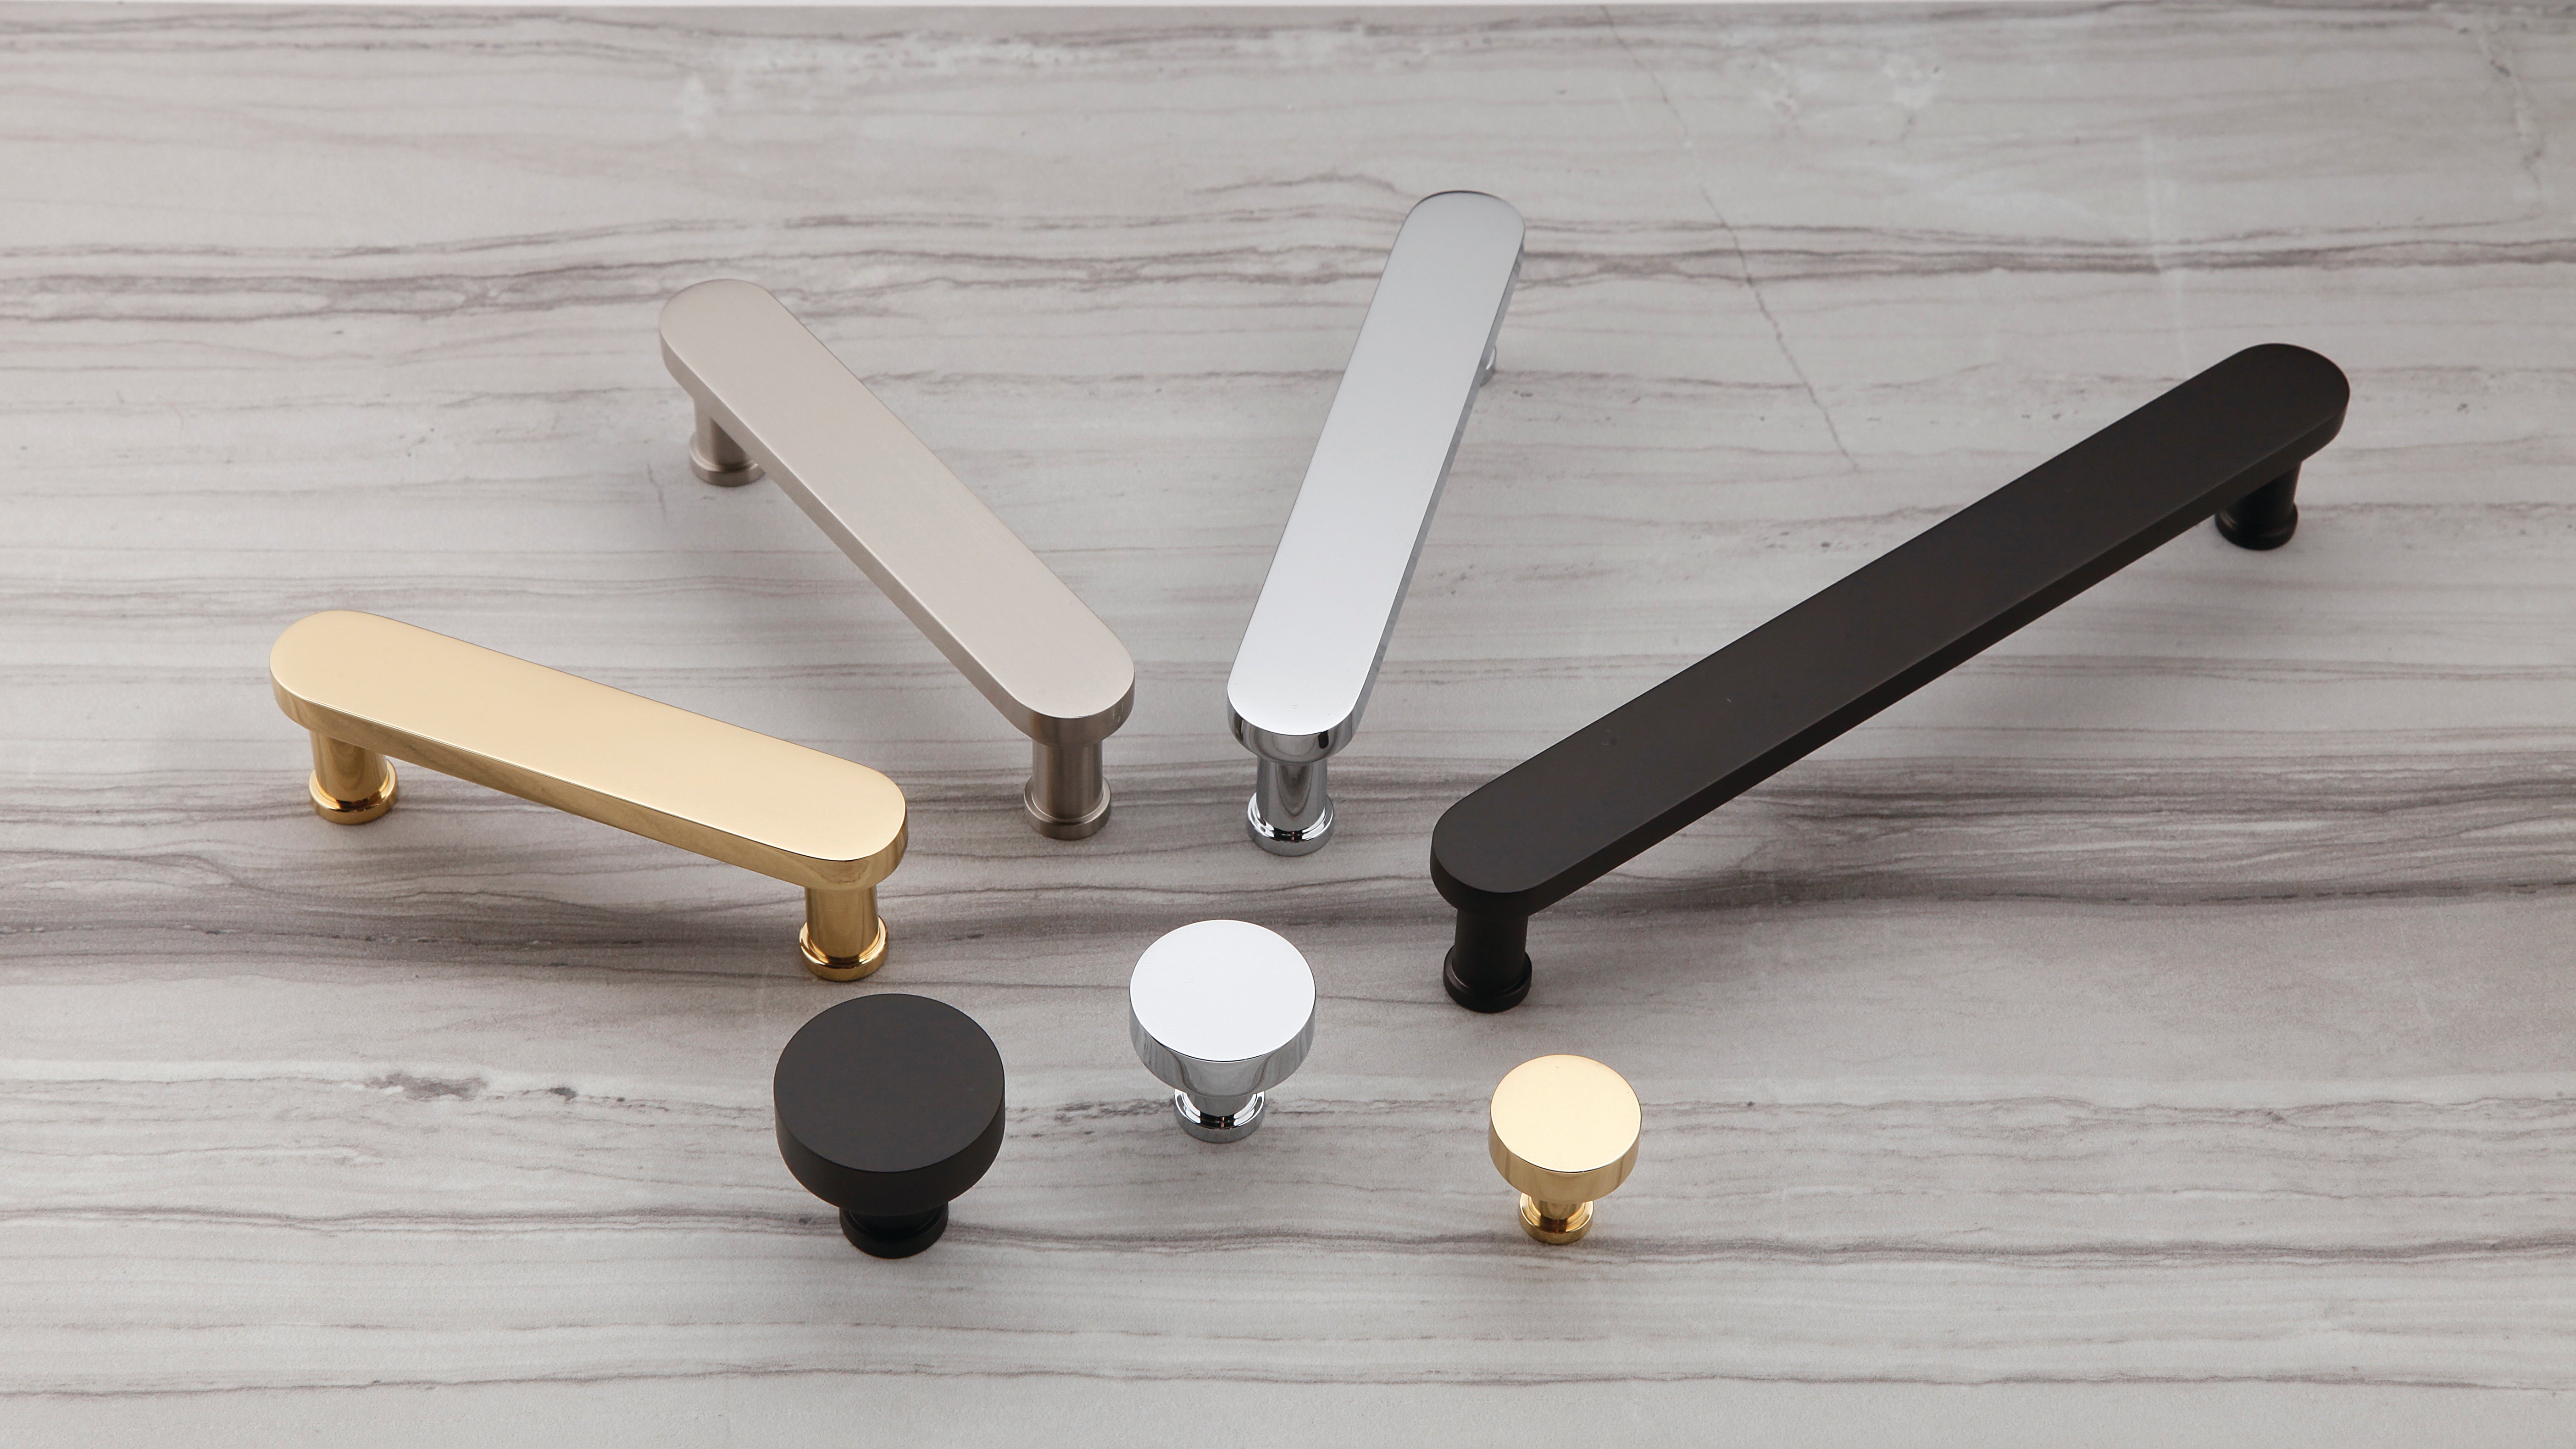 Stainless Steel, Bronze, Brass, or Aluminum: How to Choose Handle Materials